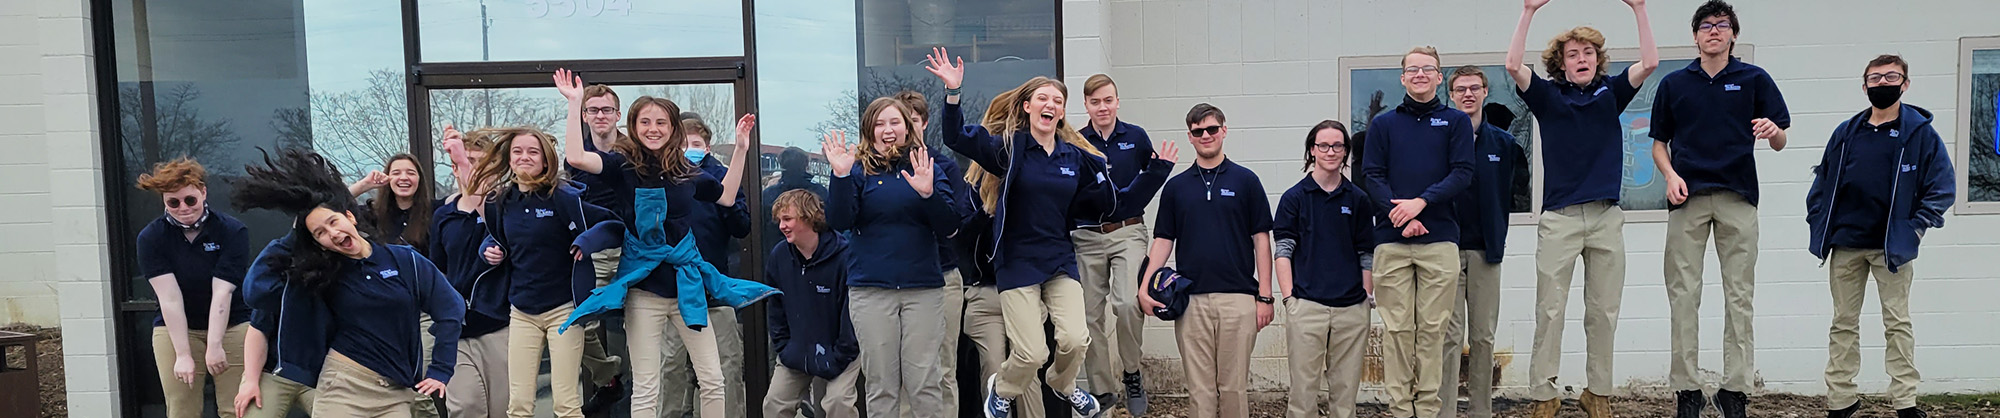 Group of high school students waving to the camera in front of a building